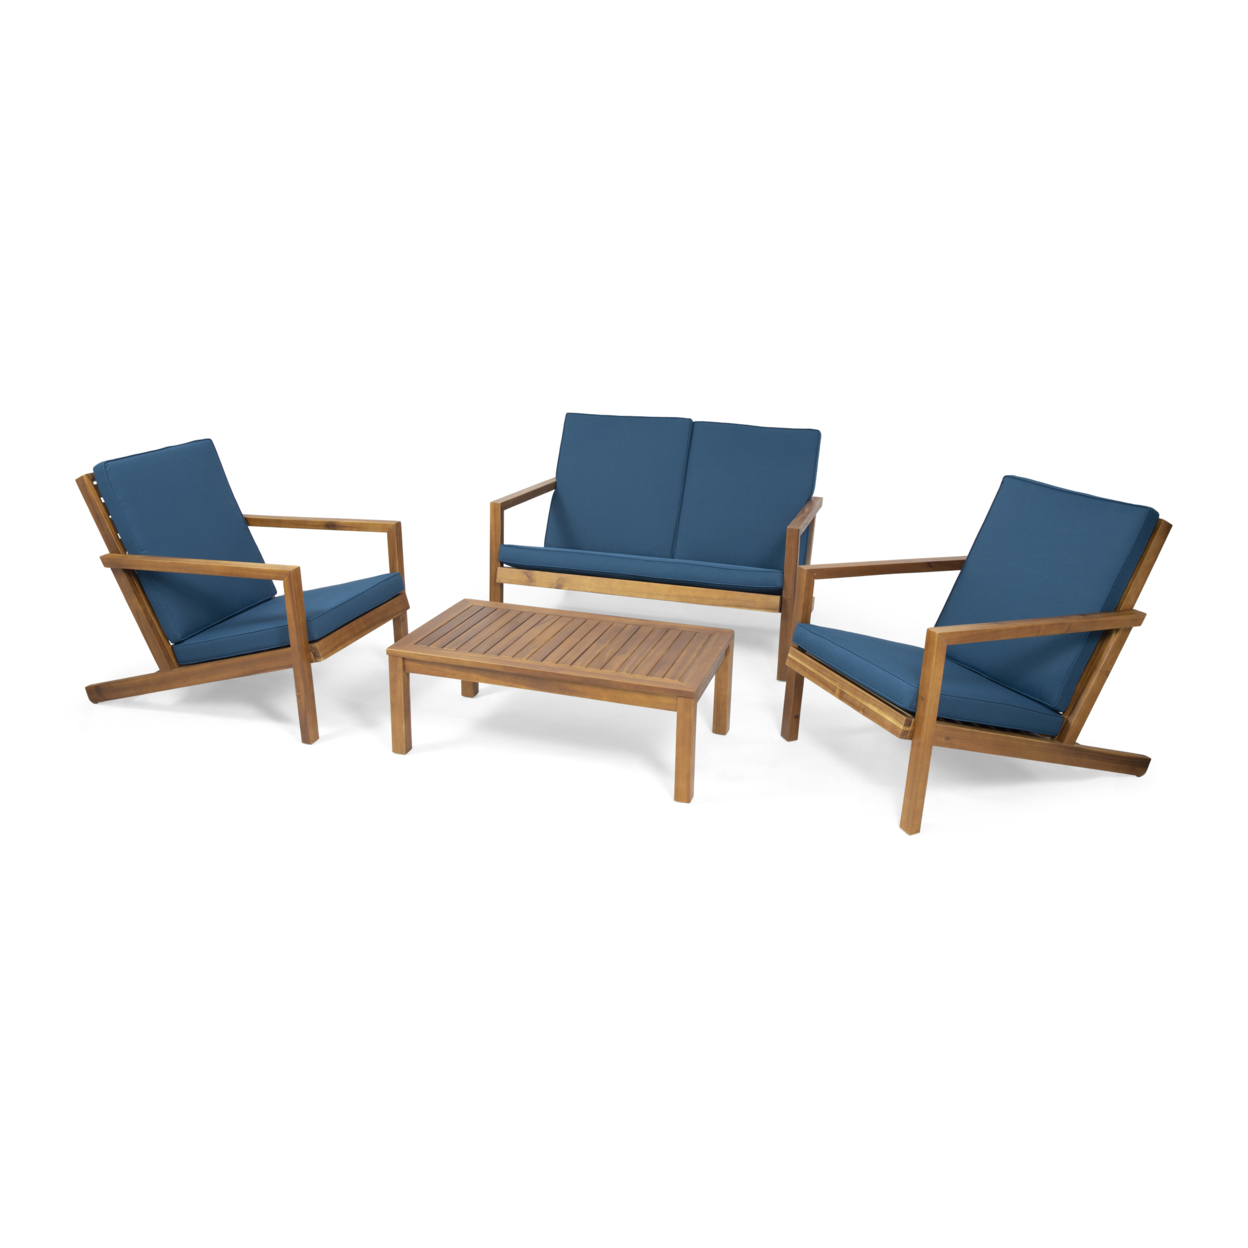 Camryn Outdoor 4 Seater Chat Set With Cushions - Brown Patina + Dark Teal